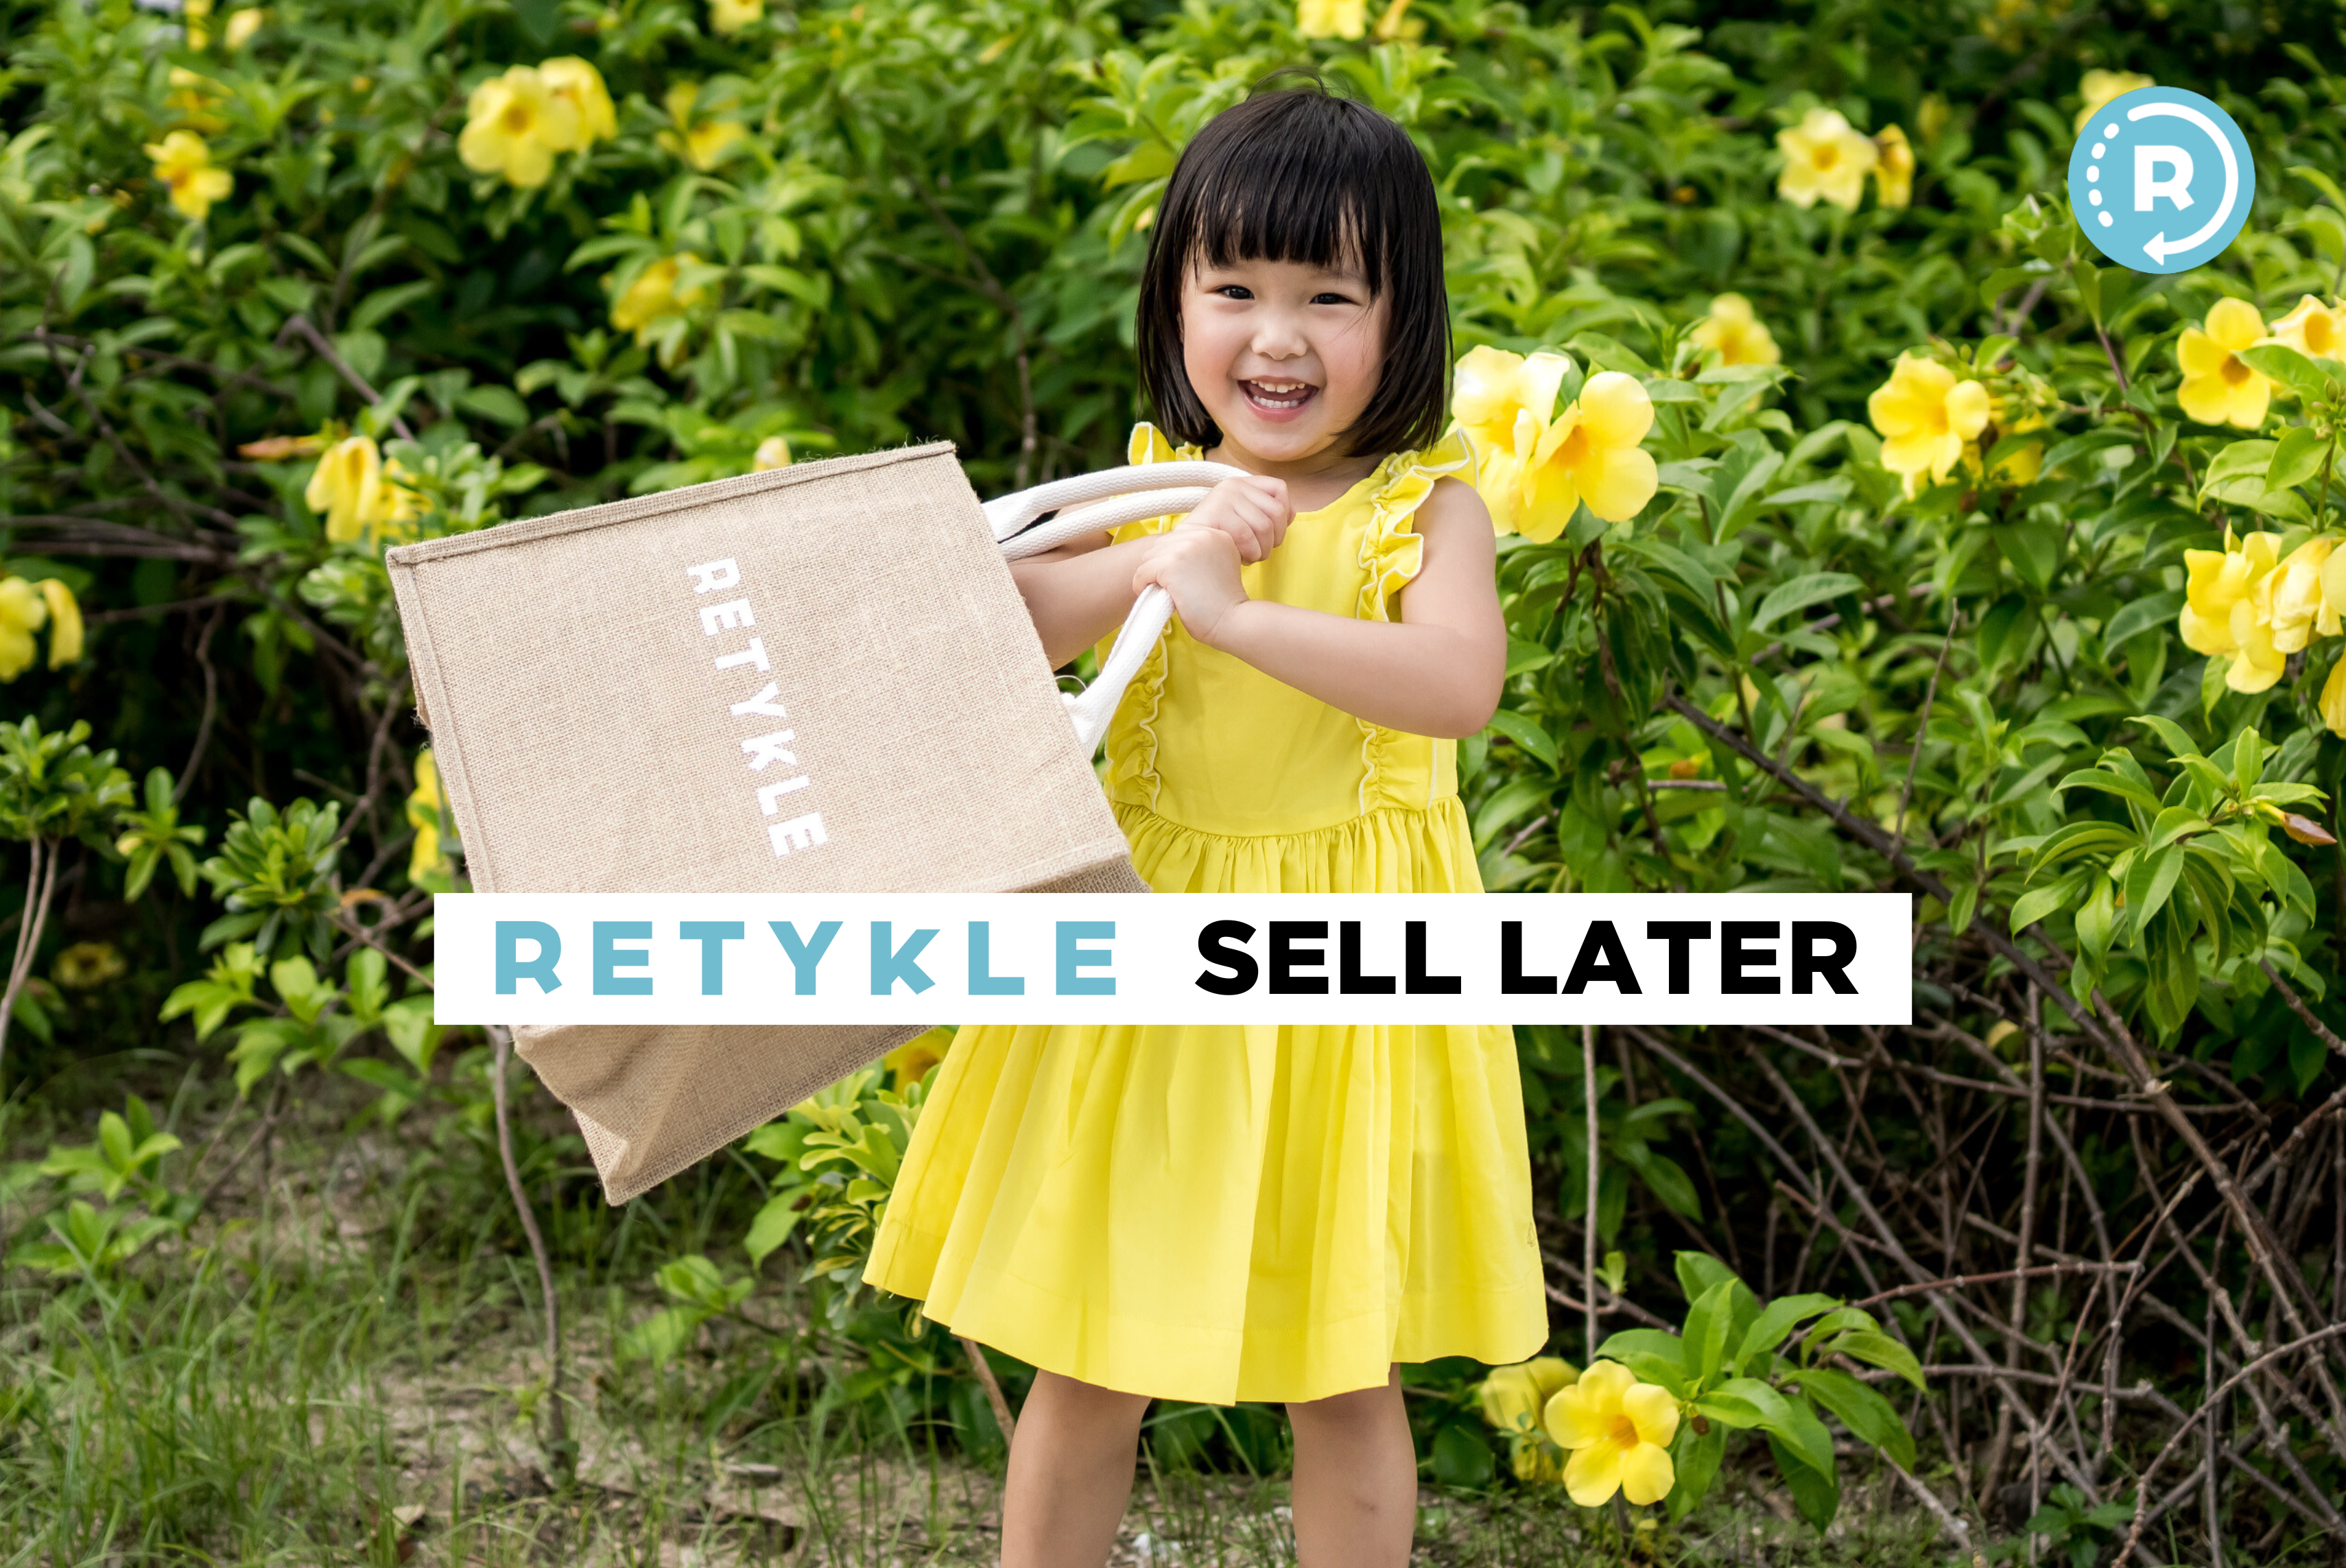 Girl wearing yellow dress holding Retykle bag. Has Retykle Sell Later sign. 